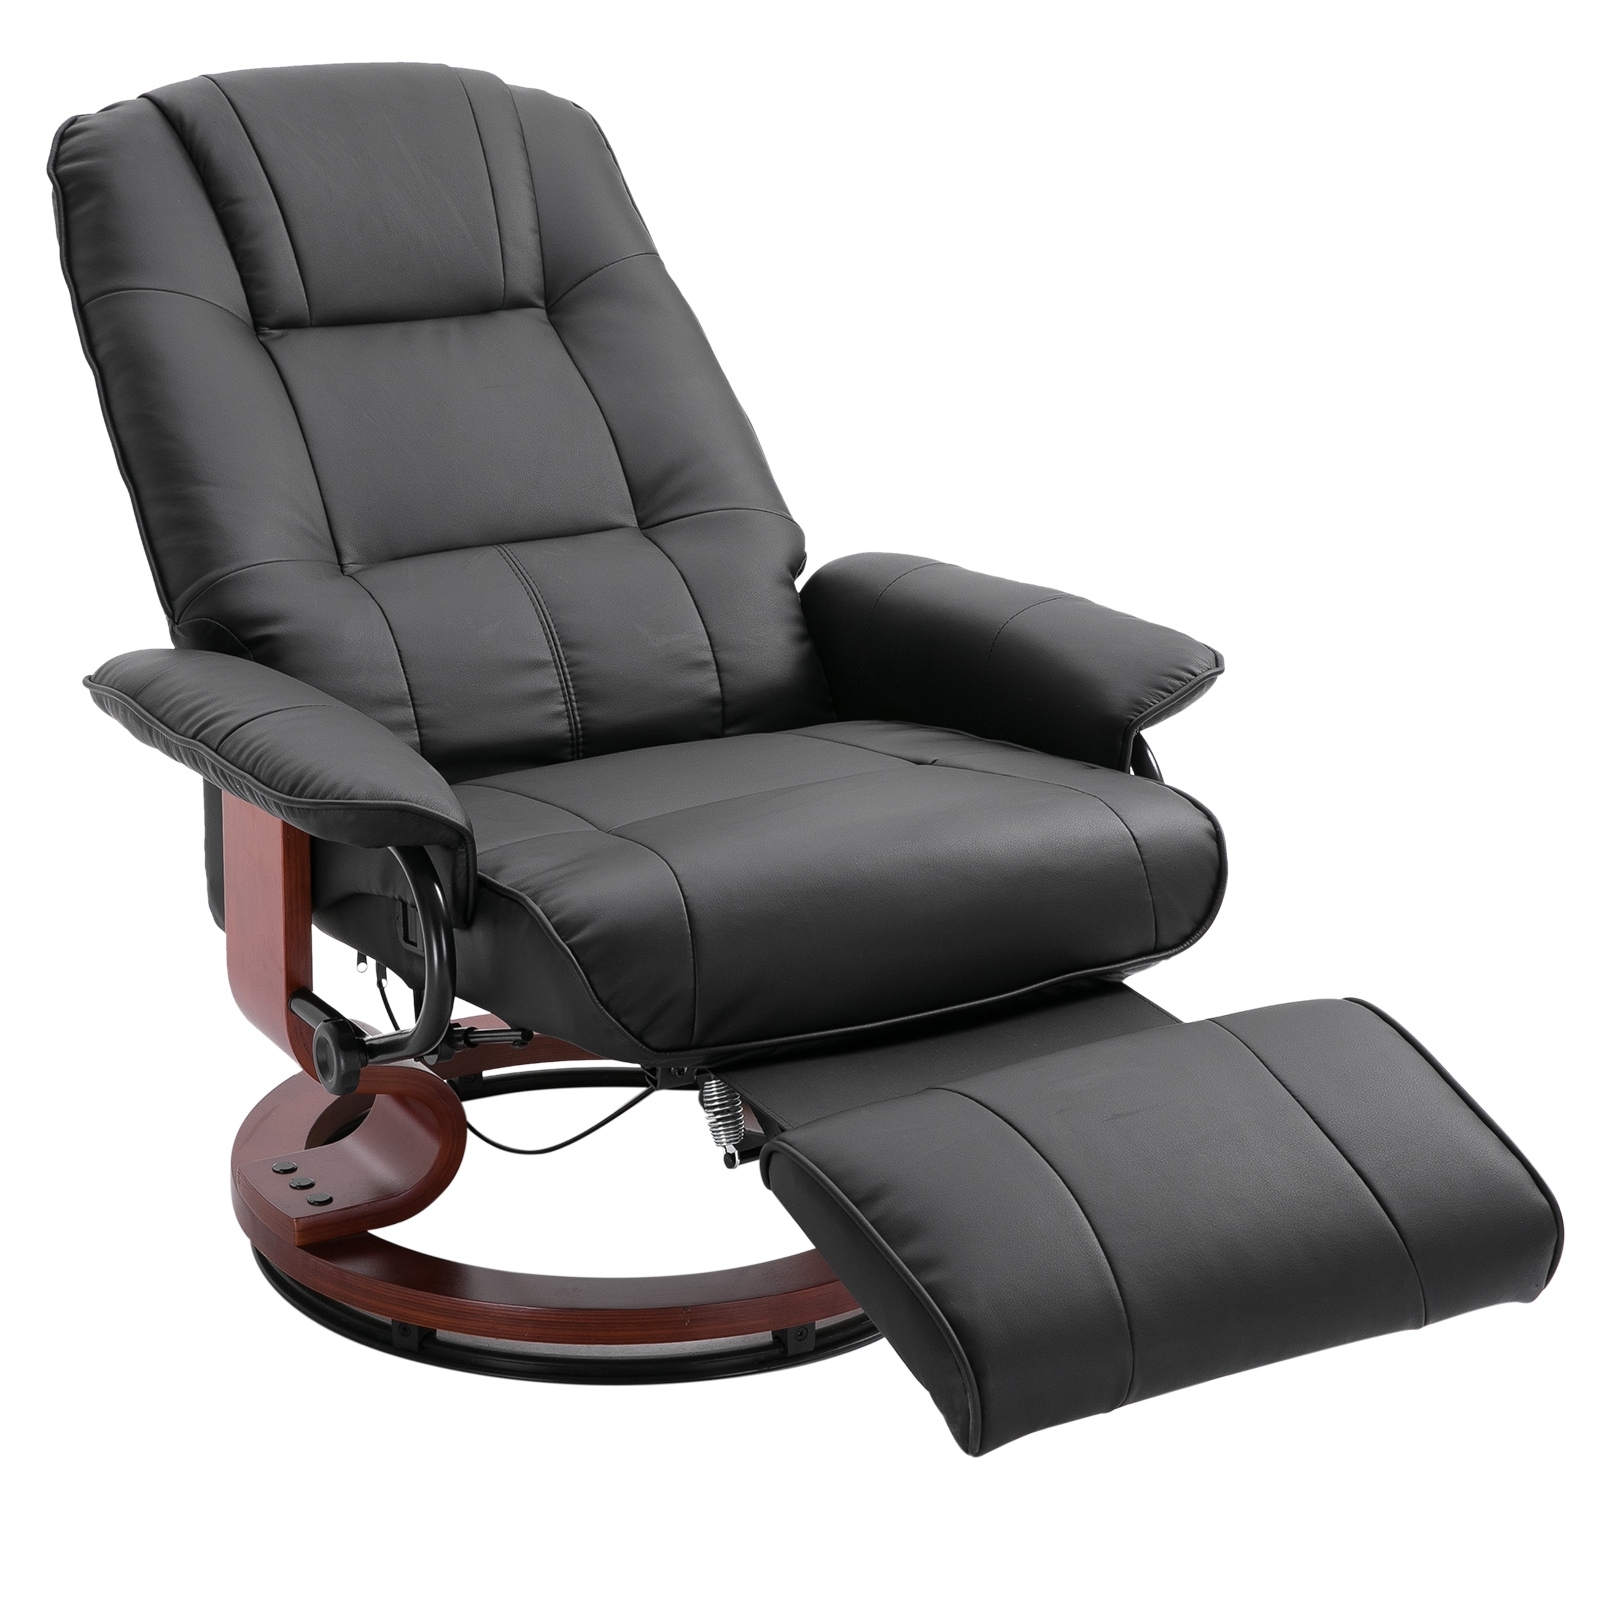 HomCom Faux Leather Adjustable Manual Swivel Base Recliner Chair